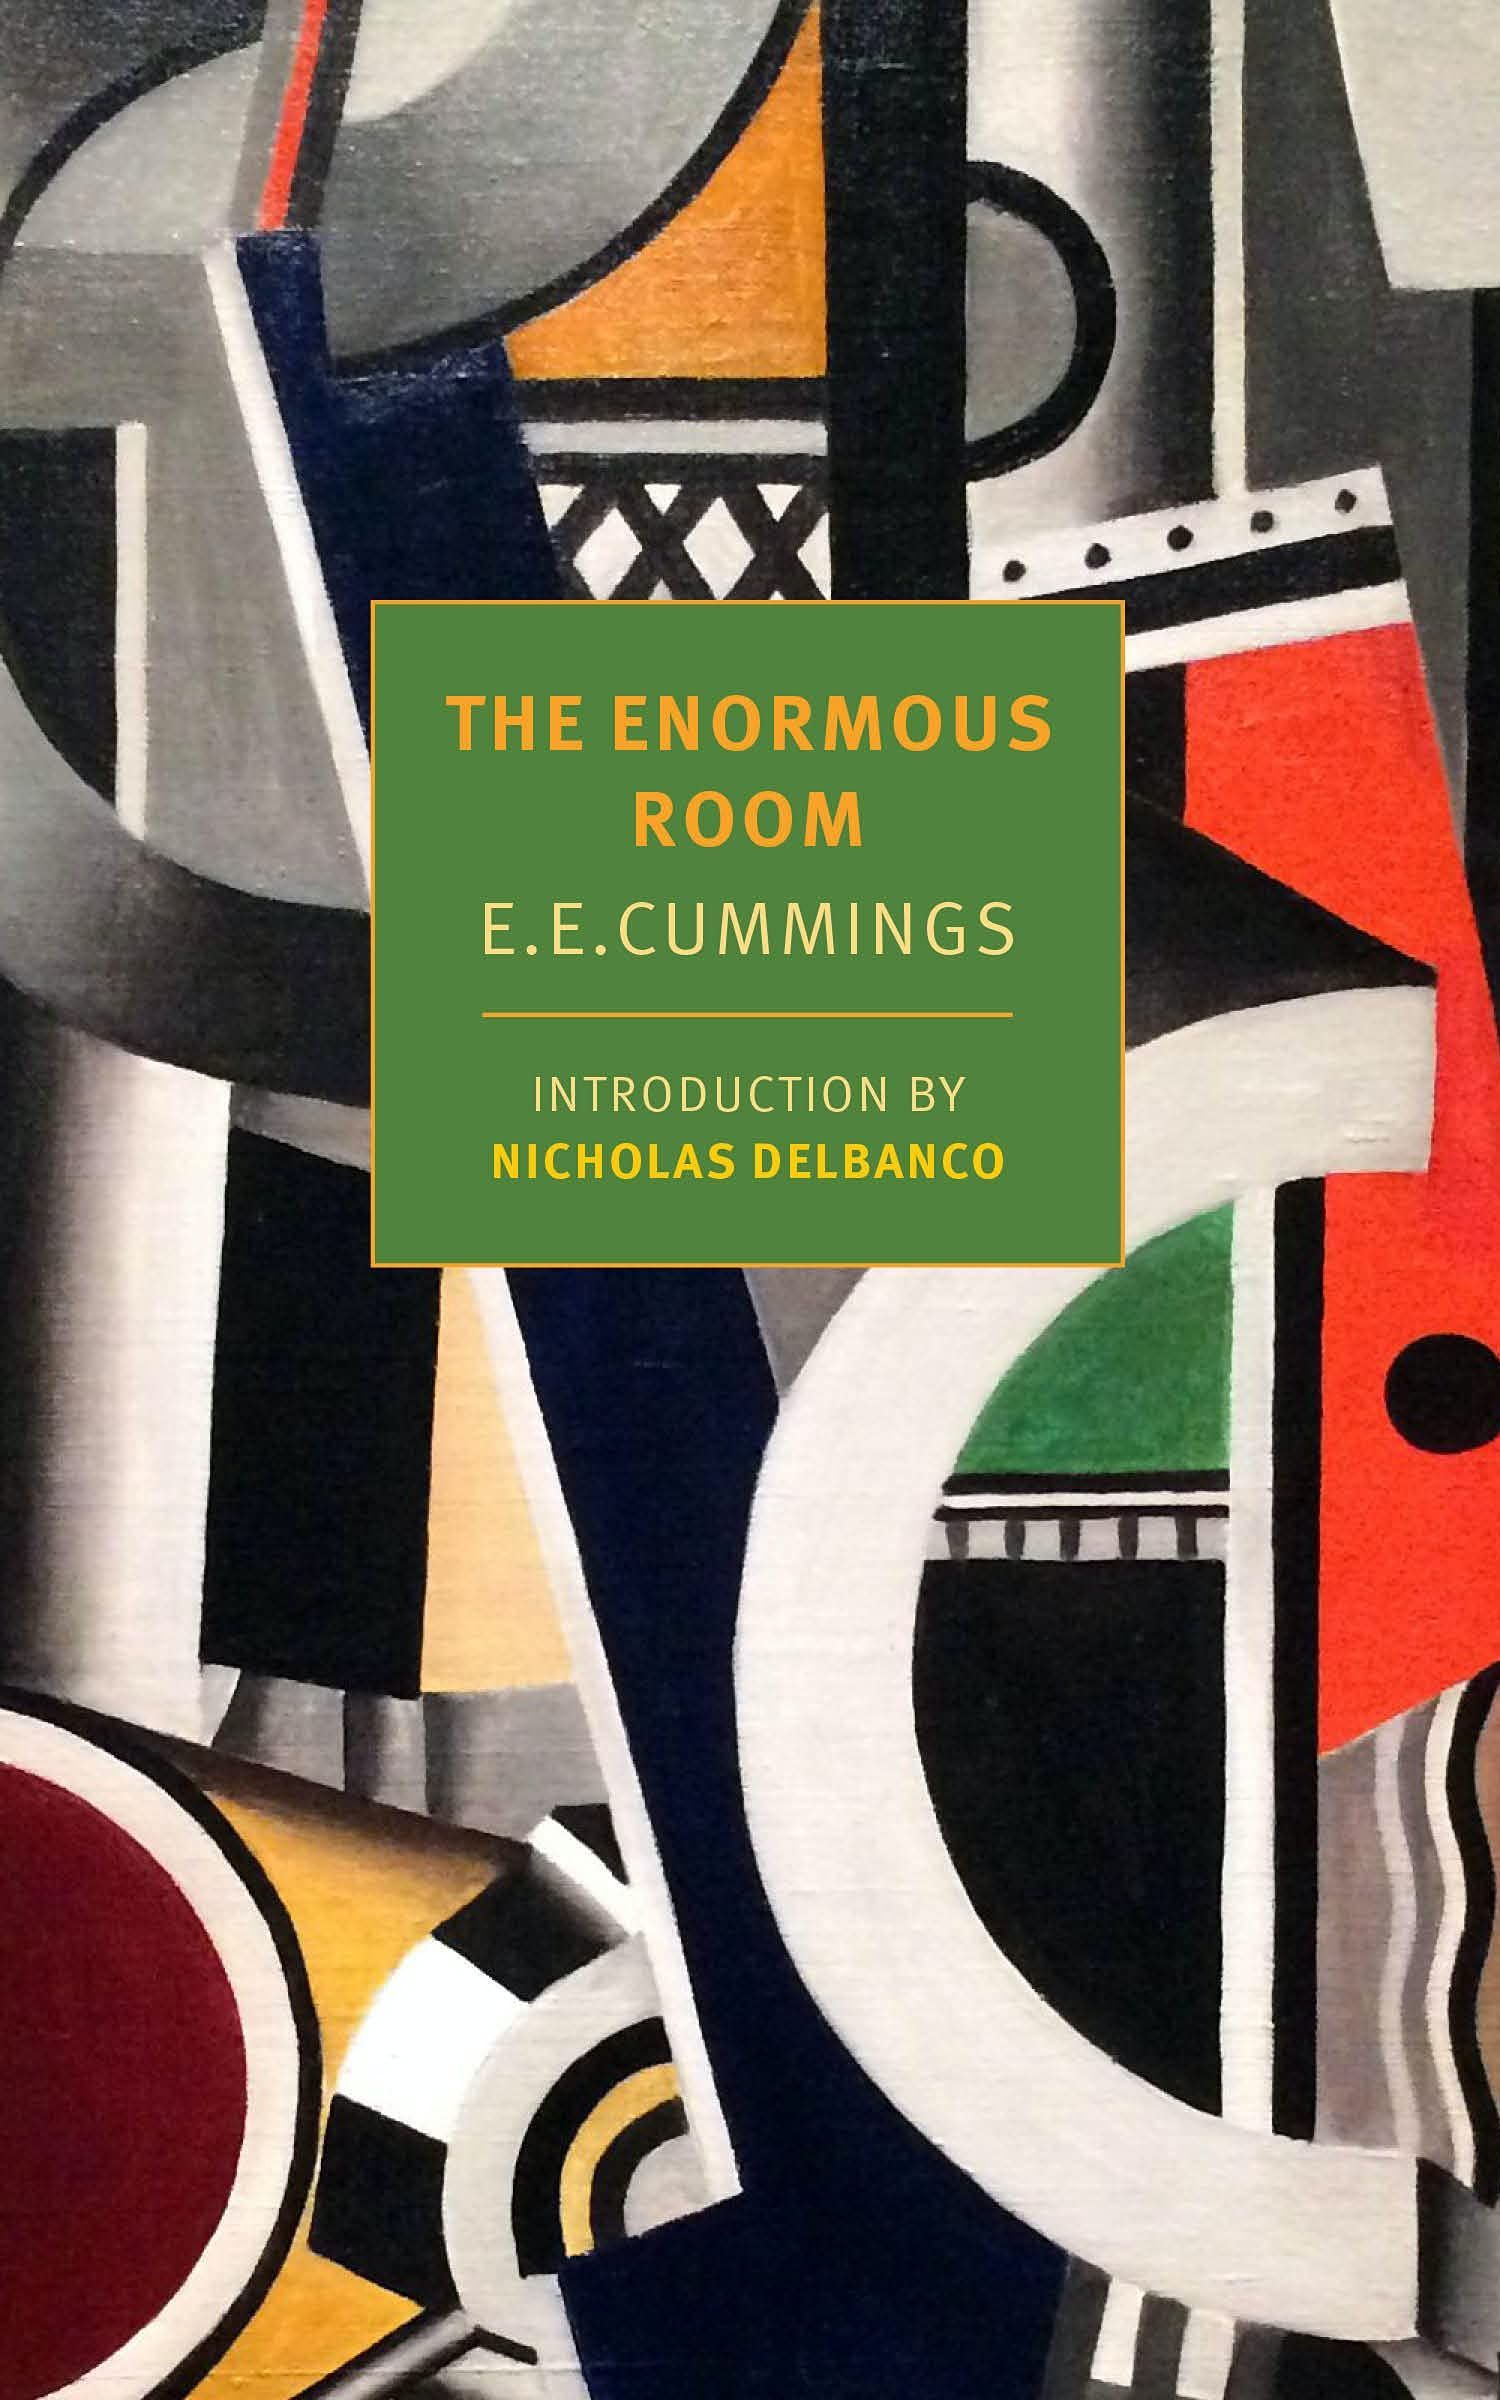 The Tang of Herded Men, and Their Smell: On the Centennial Edition of E. E. Cummings’s “The Enormous Room”